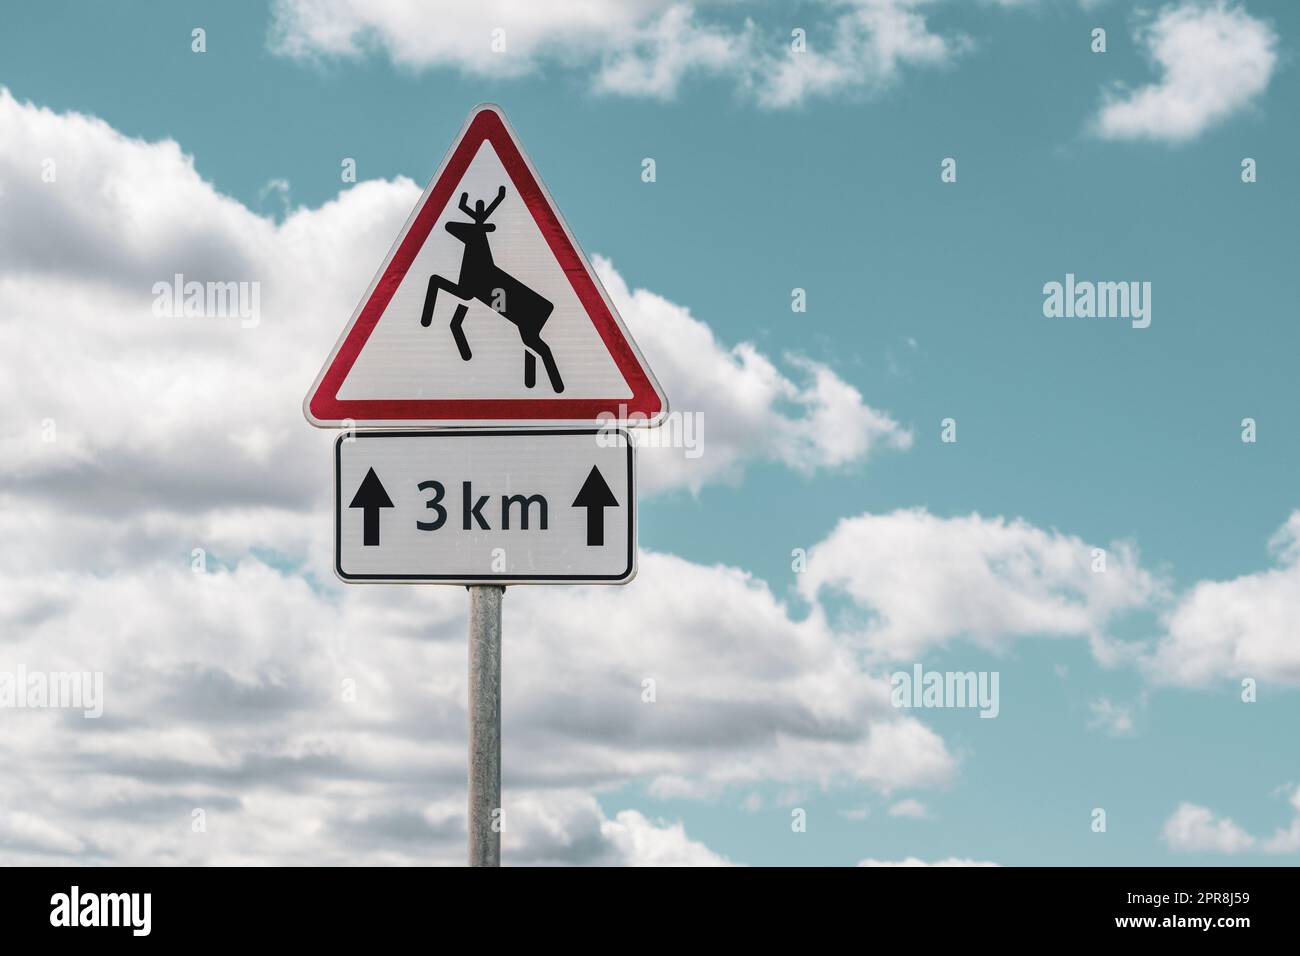 Animals crossing the road warning sign Stock Photo